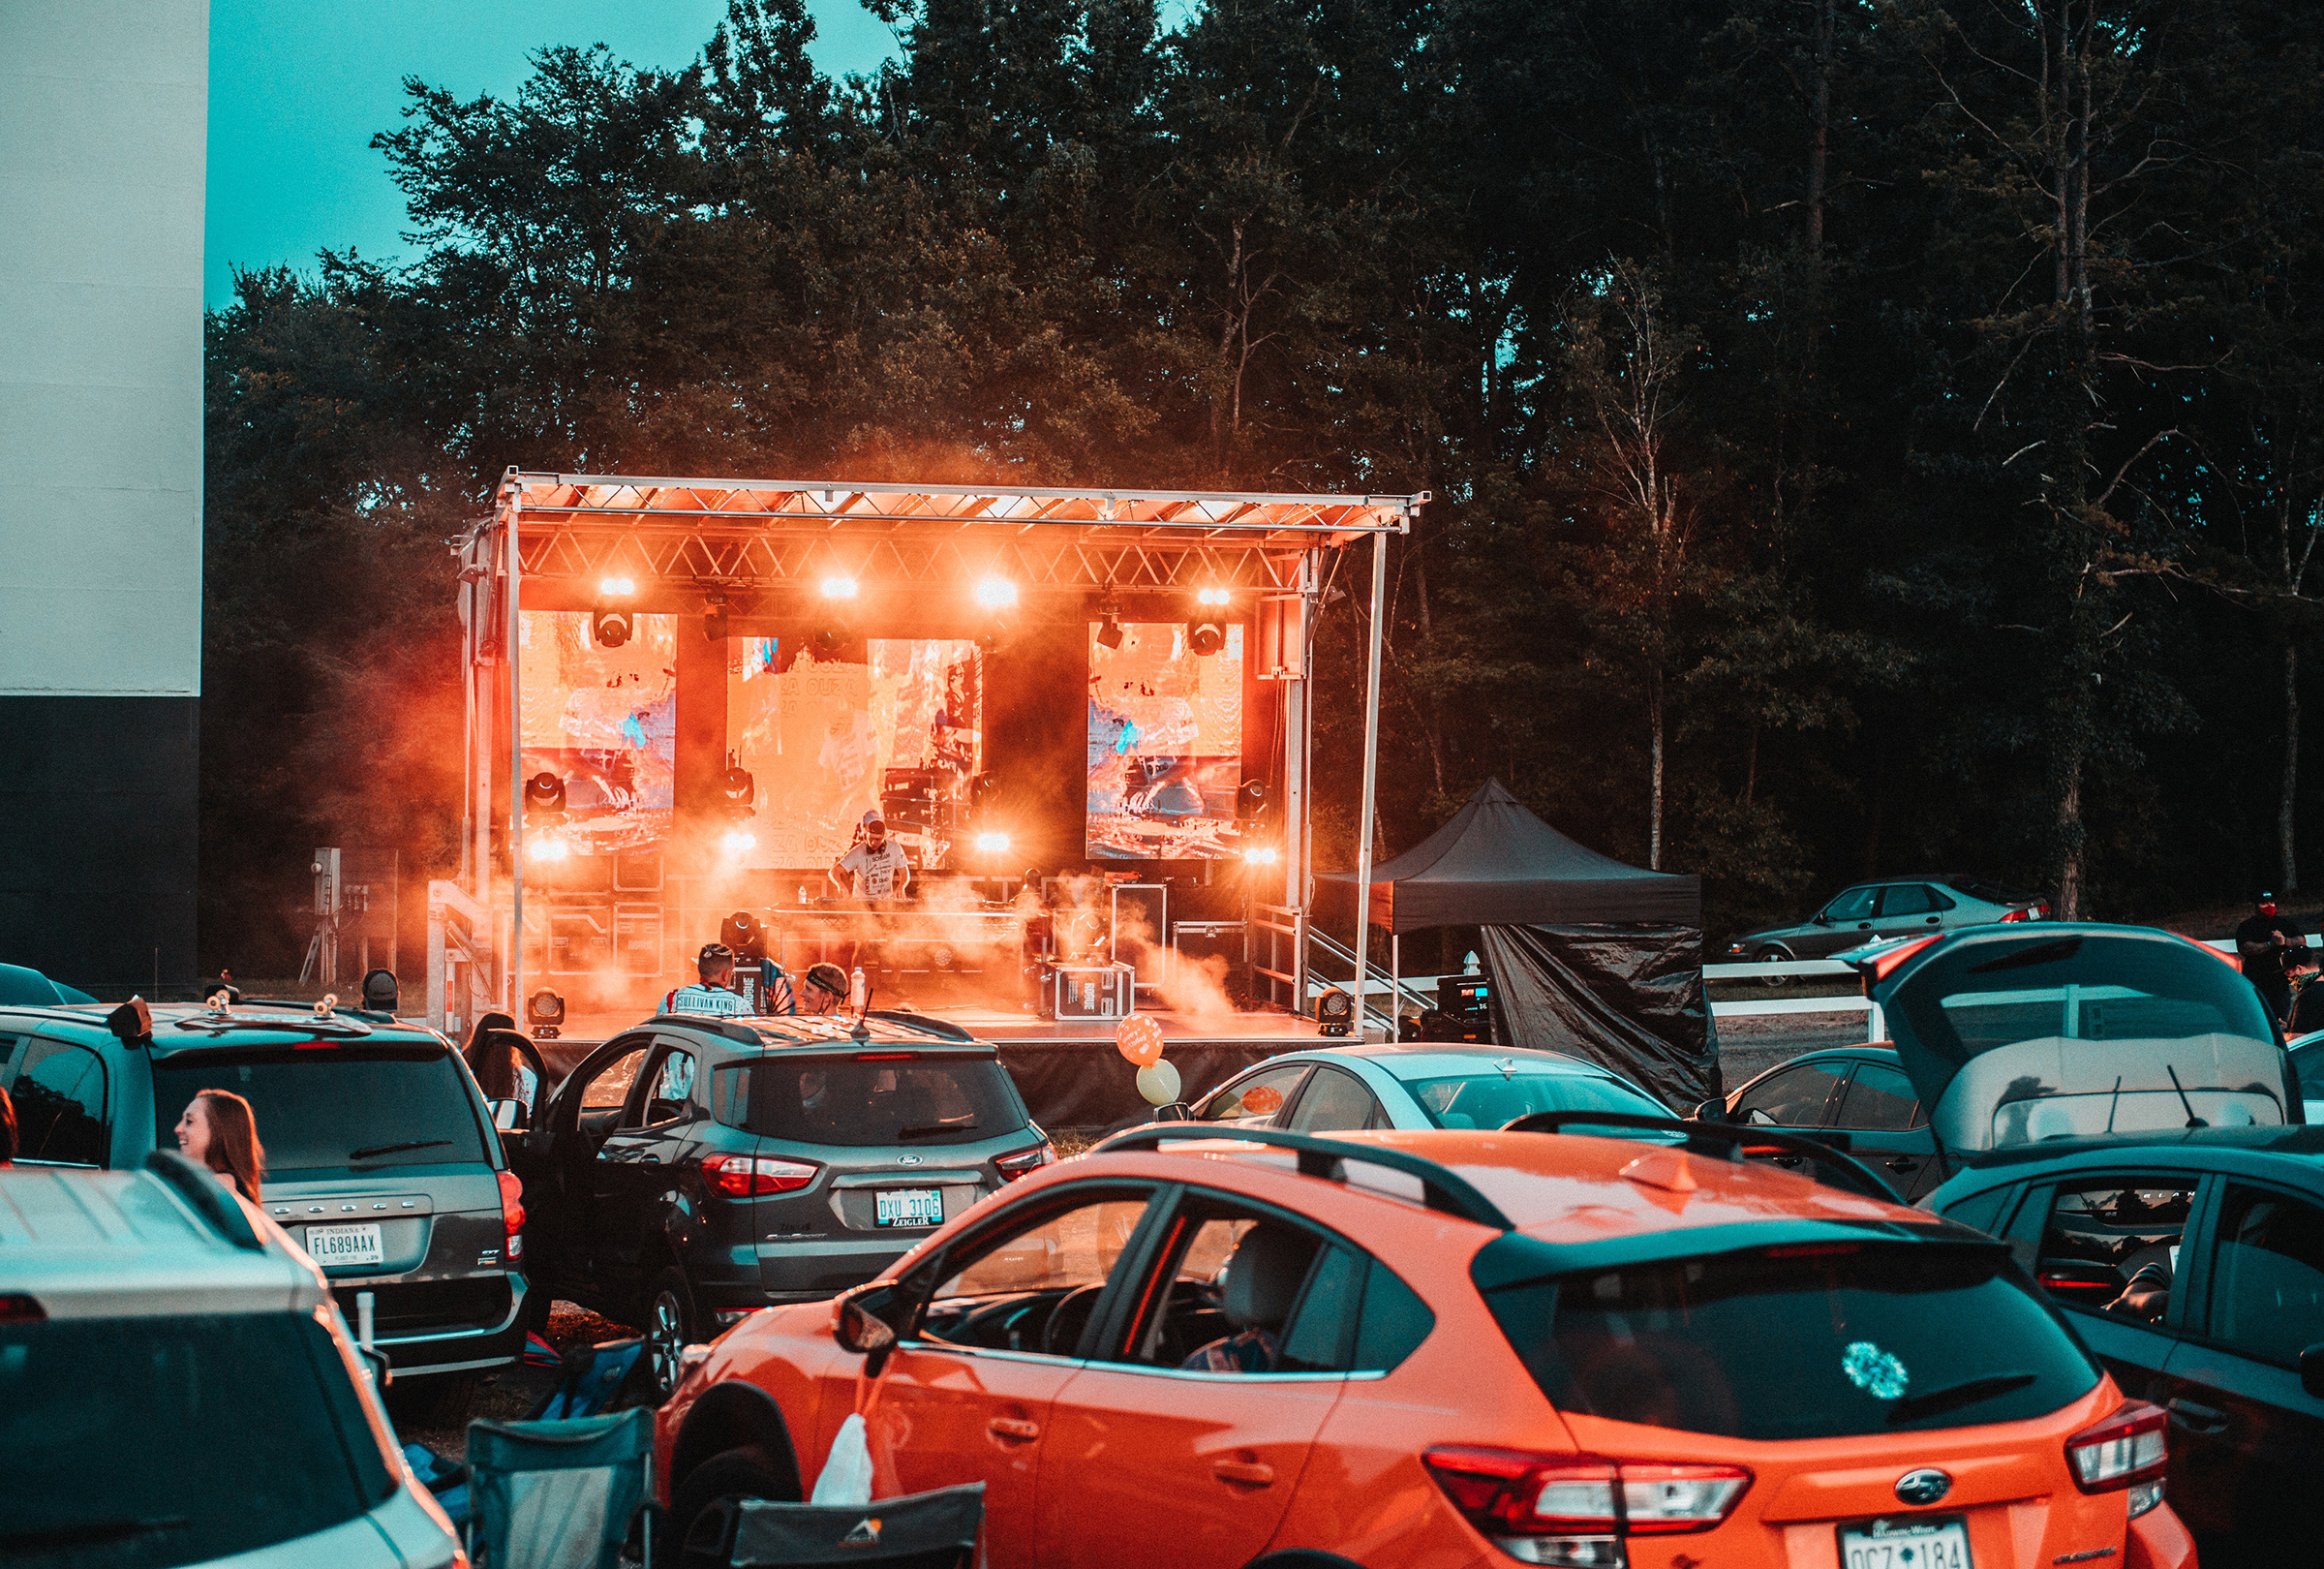 The Hounds Drive-In in Kings Mountain, N.C., has hosted more than 18 concerts, and included bands and DJs